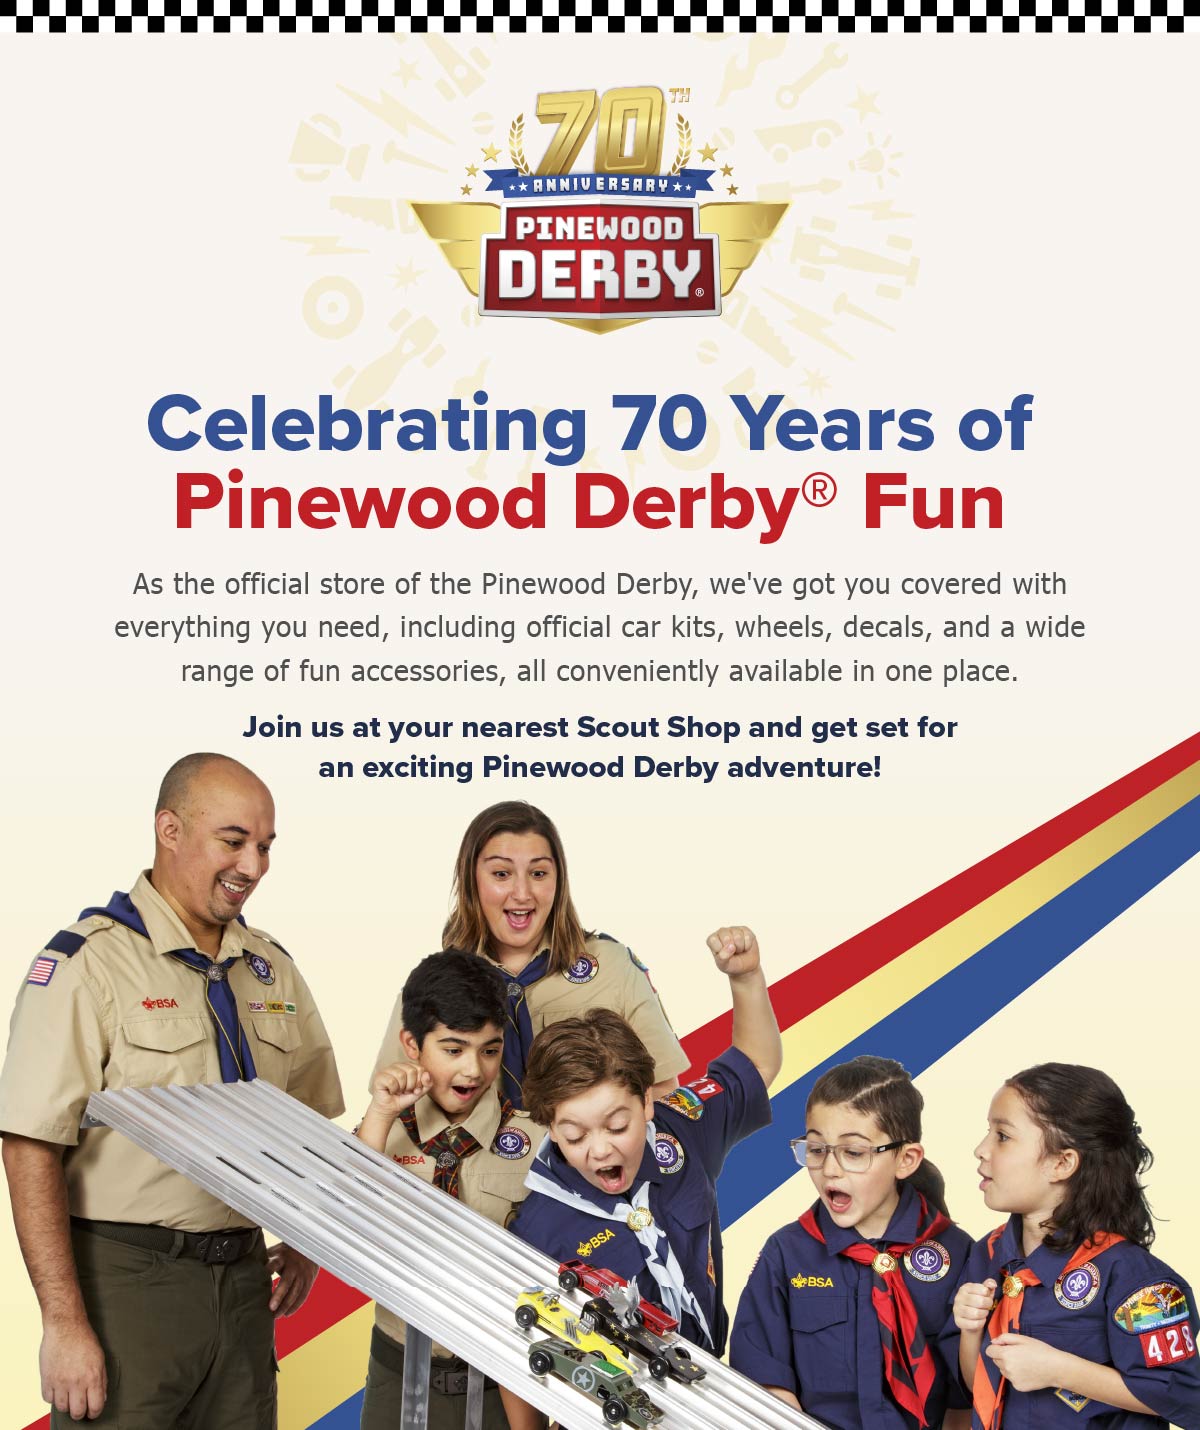 As the official store of the Pinewood Derby, we've got you covered with everything you need, including official car kits, wheels, decals, and a wide range of fun accessories. Jion us at your nearest Scout Shop and get set for an exciting Pinewood Derby adventure!